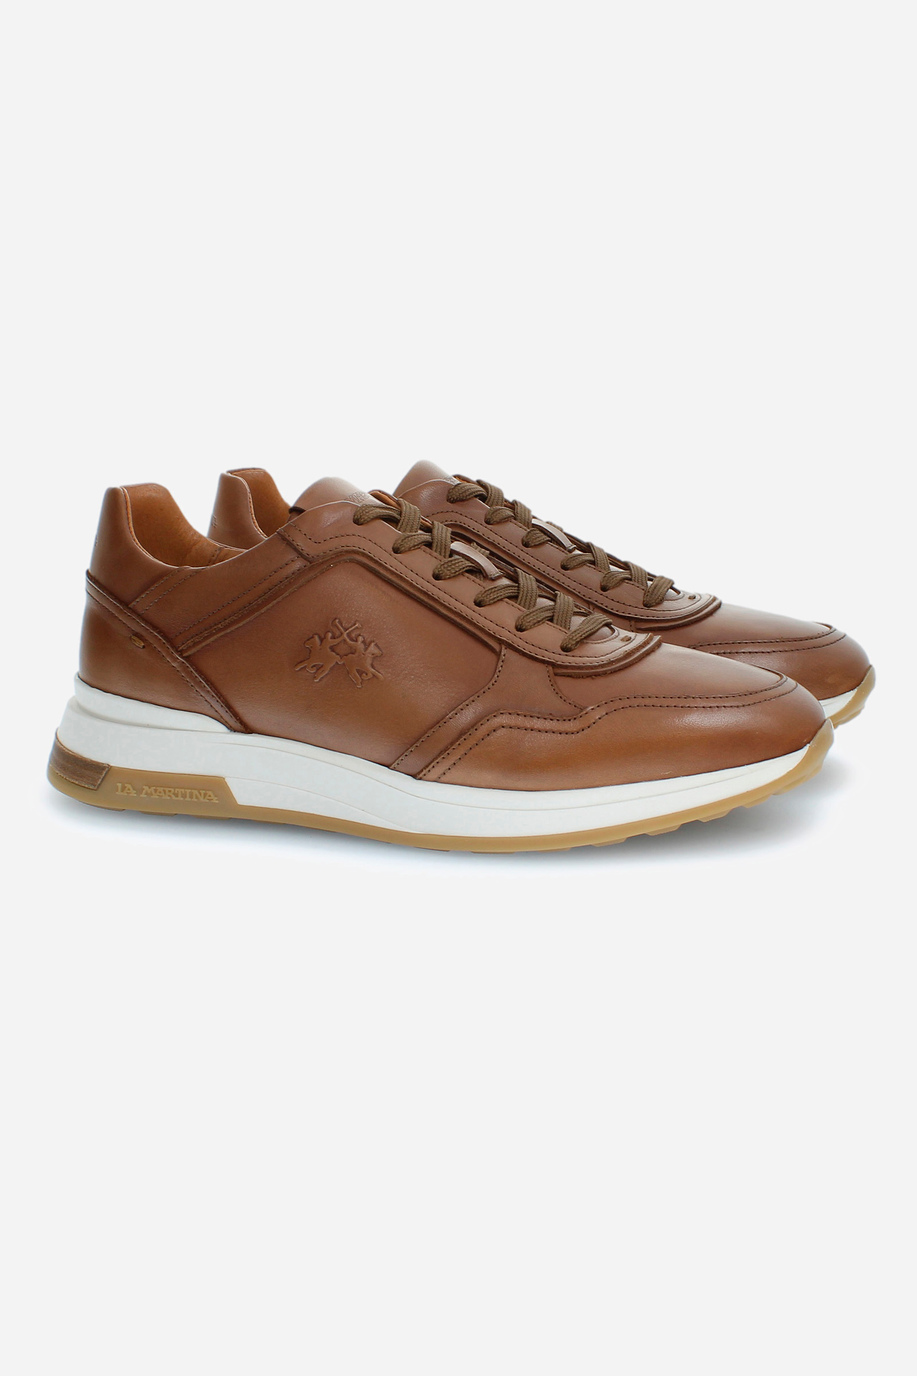 Men's trainers with raised sole - Shoes and Accessories | La Martina - Official Online Shop